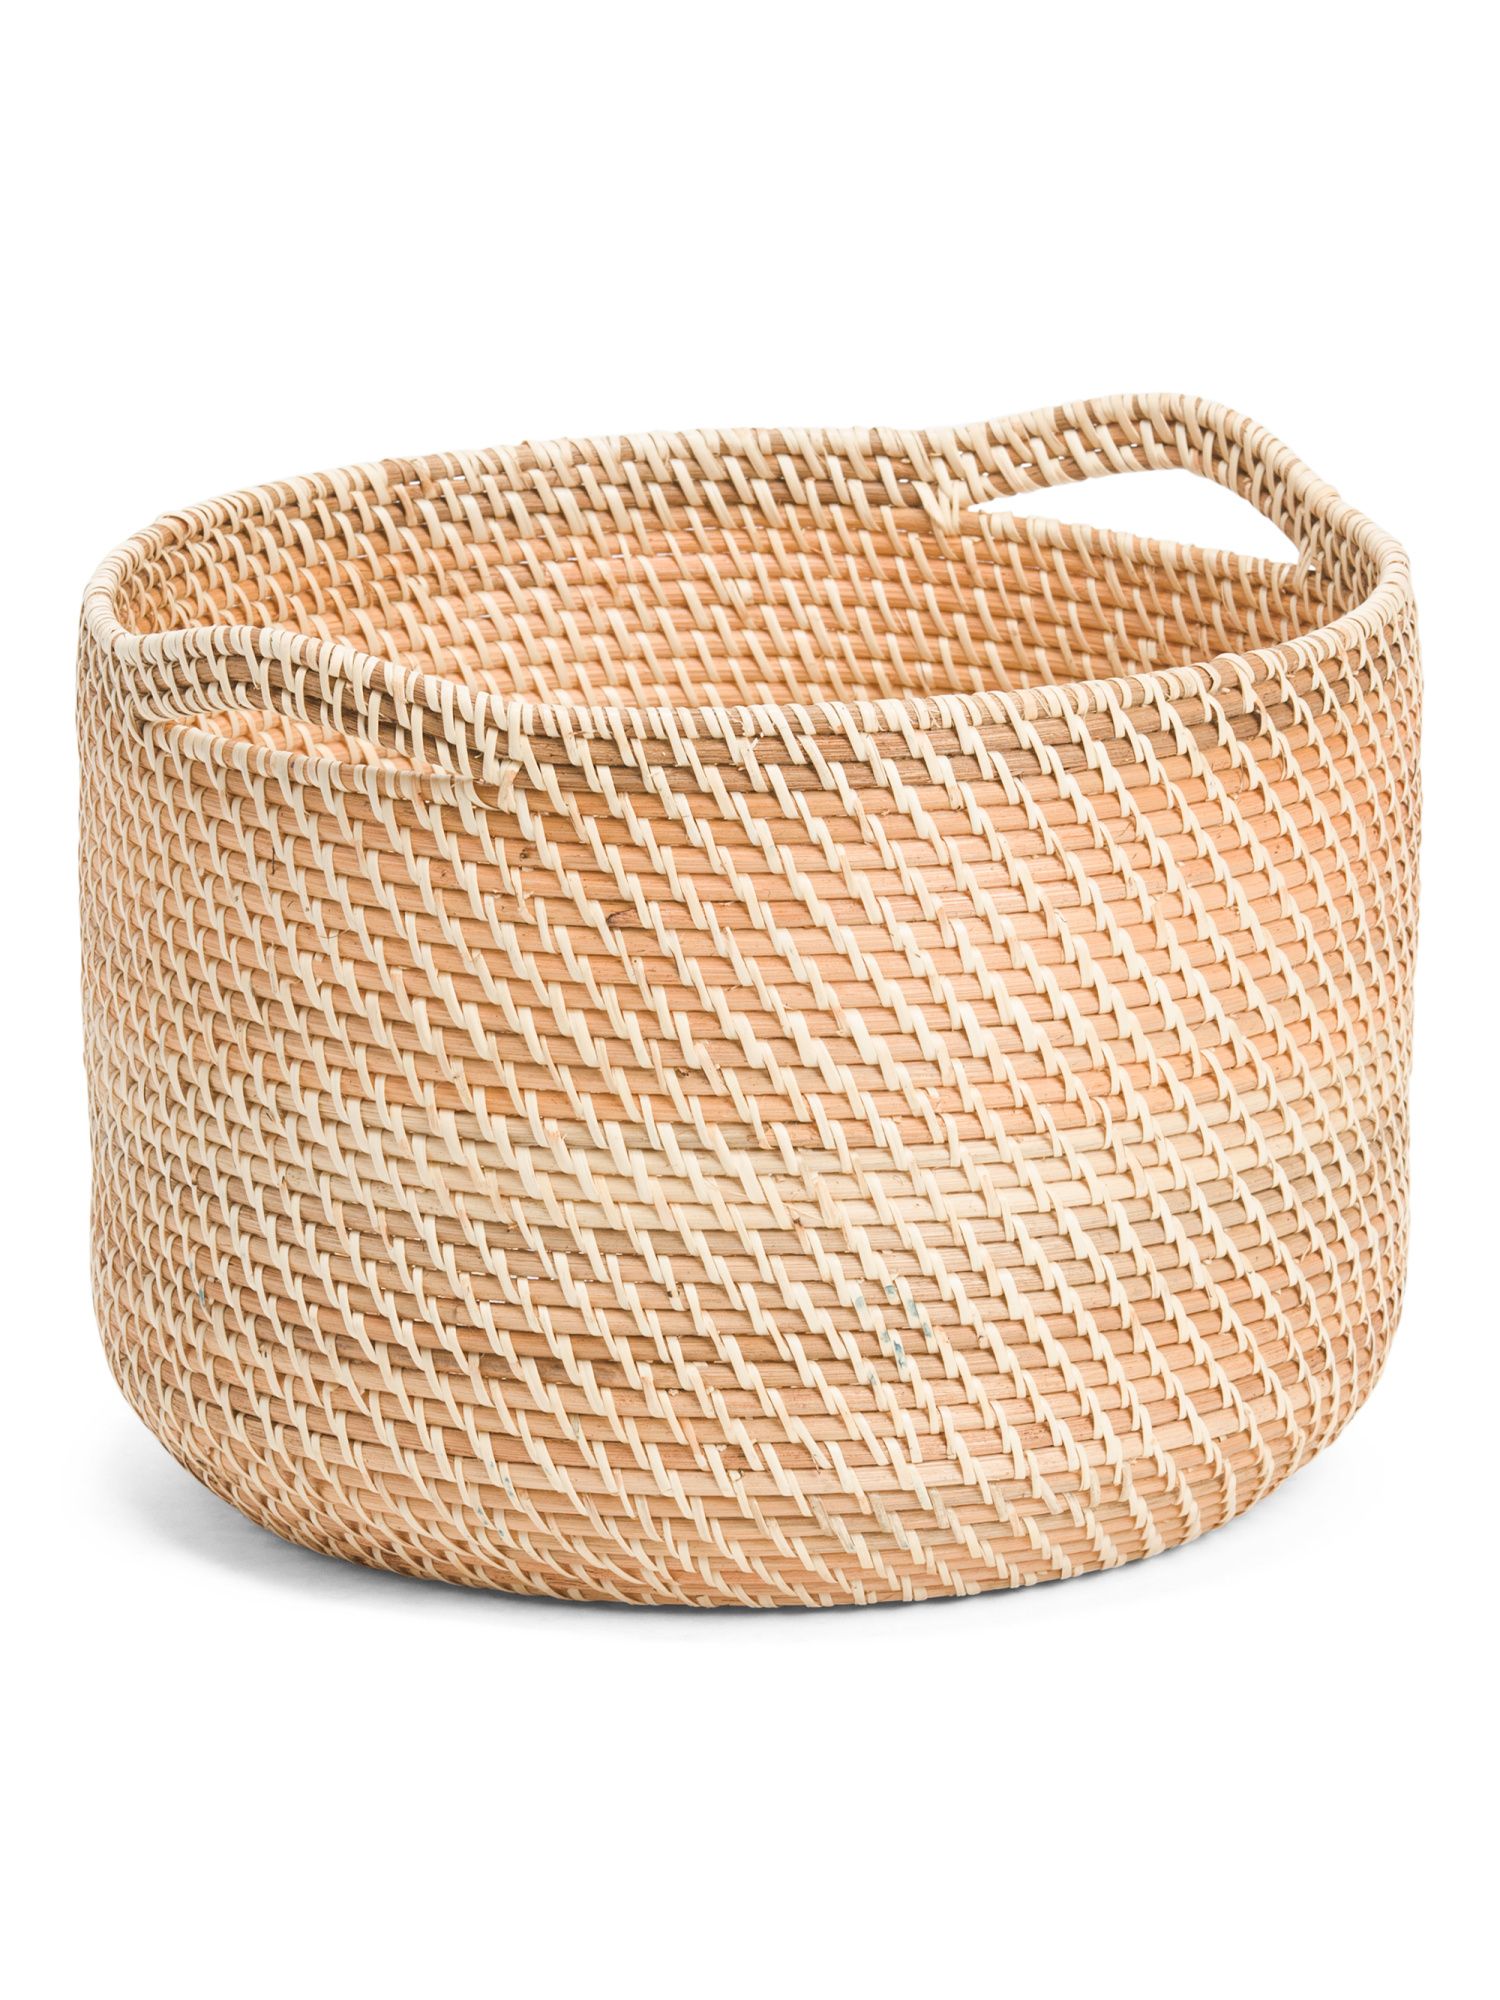 Large Round Rattan Basket With Handles | TJ Maxx